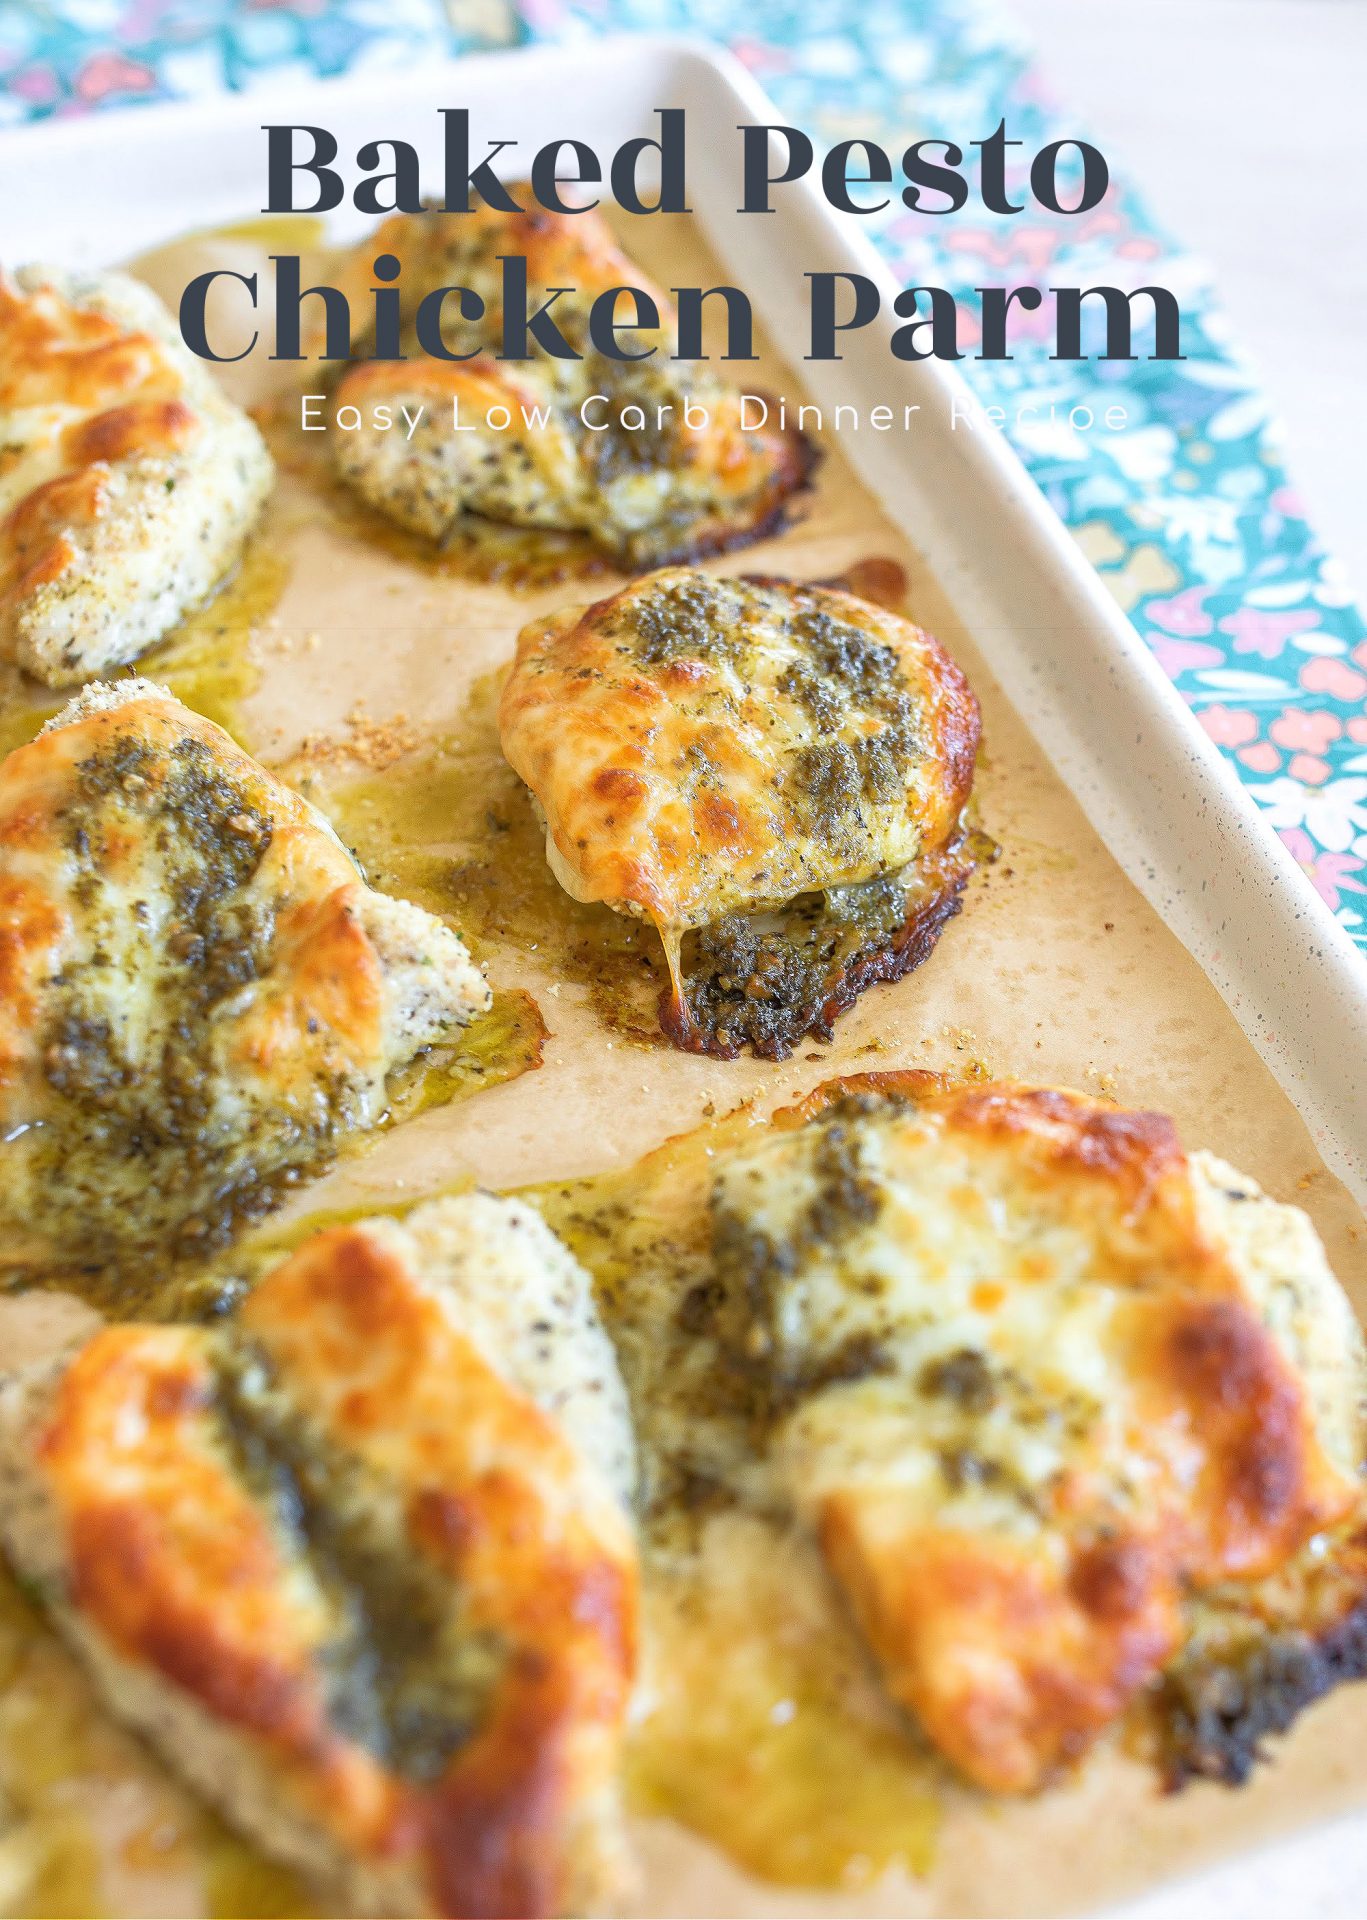 chicken, pesto, low carb, almond flour, breaded, dinner, gluten-free, baked chicken, low carb, keto, chicken parmesan, chicken pesto, roasted, easy dinner recipe 